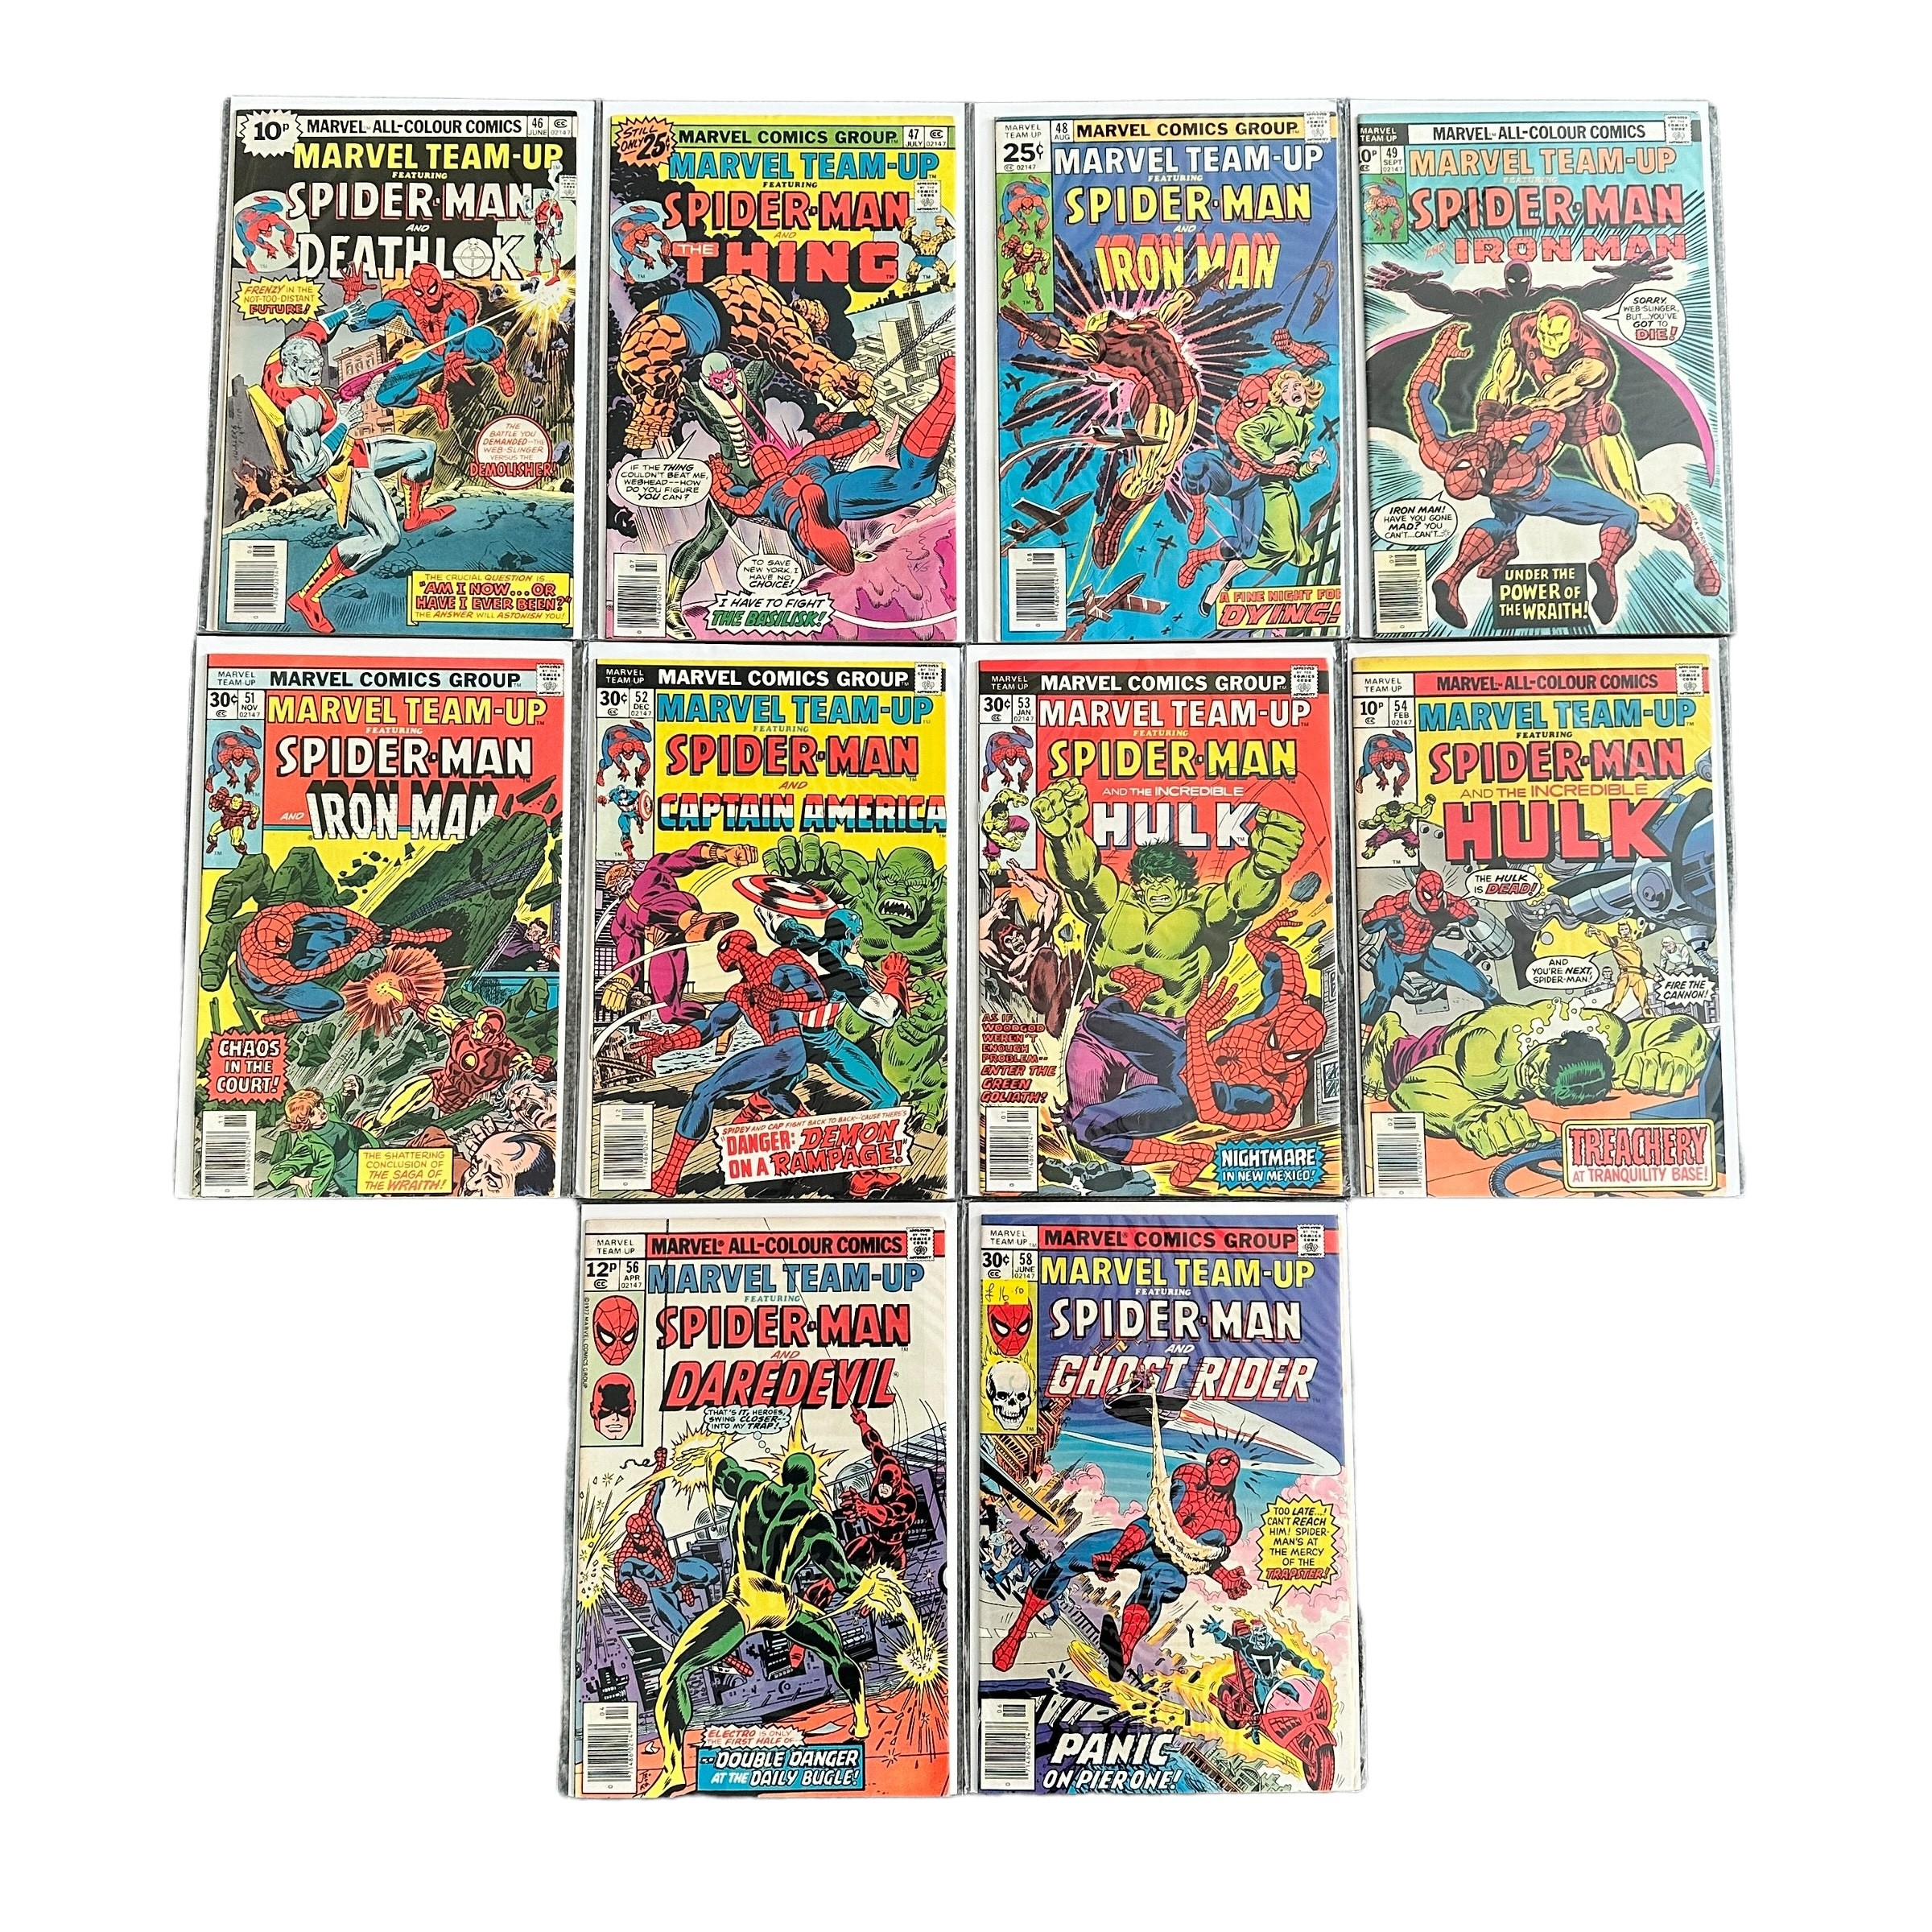 Marvel Team Up Featuring Spider-Man 1970s Nos 4, 17, 19, 26, 27, 29-31, 36, 39, 40-43, 45-49, 51-54, - Image 2 of 2